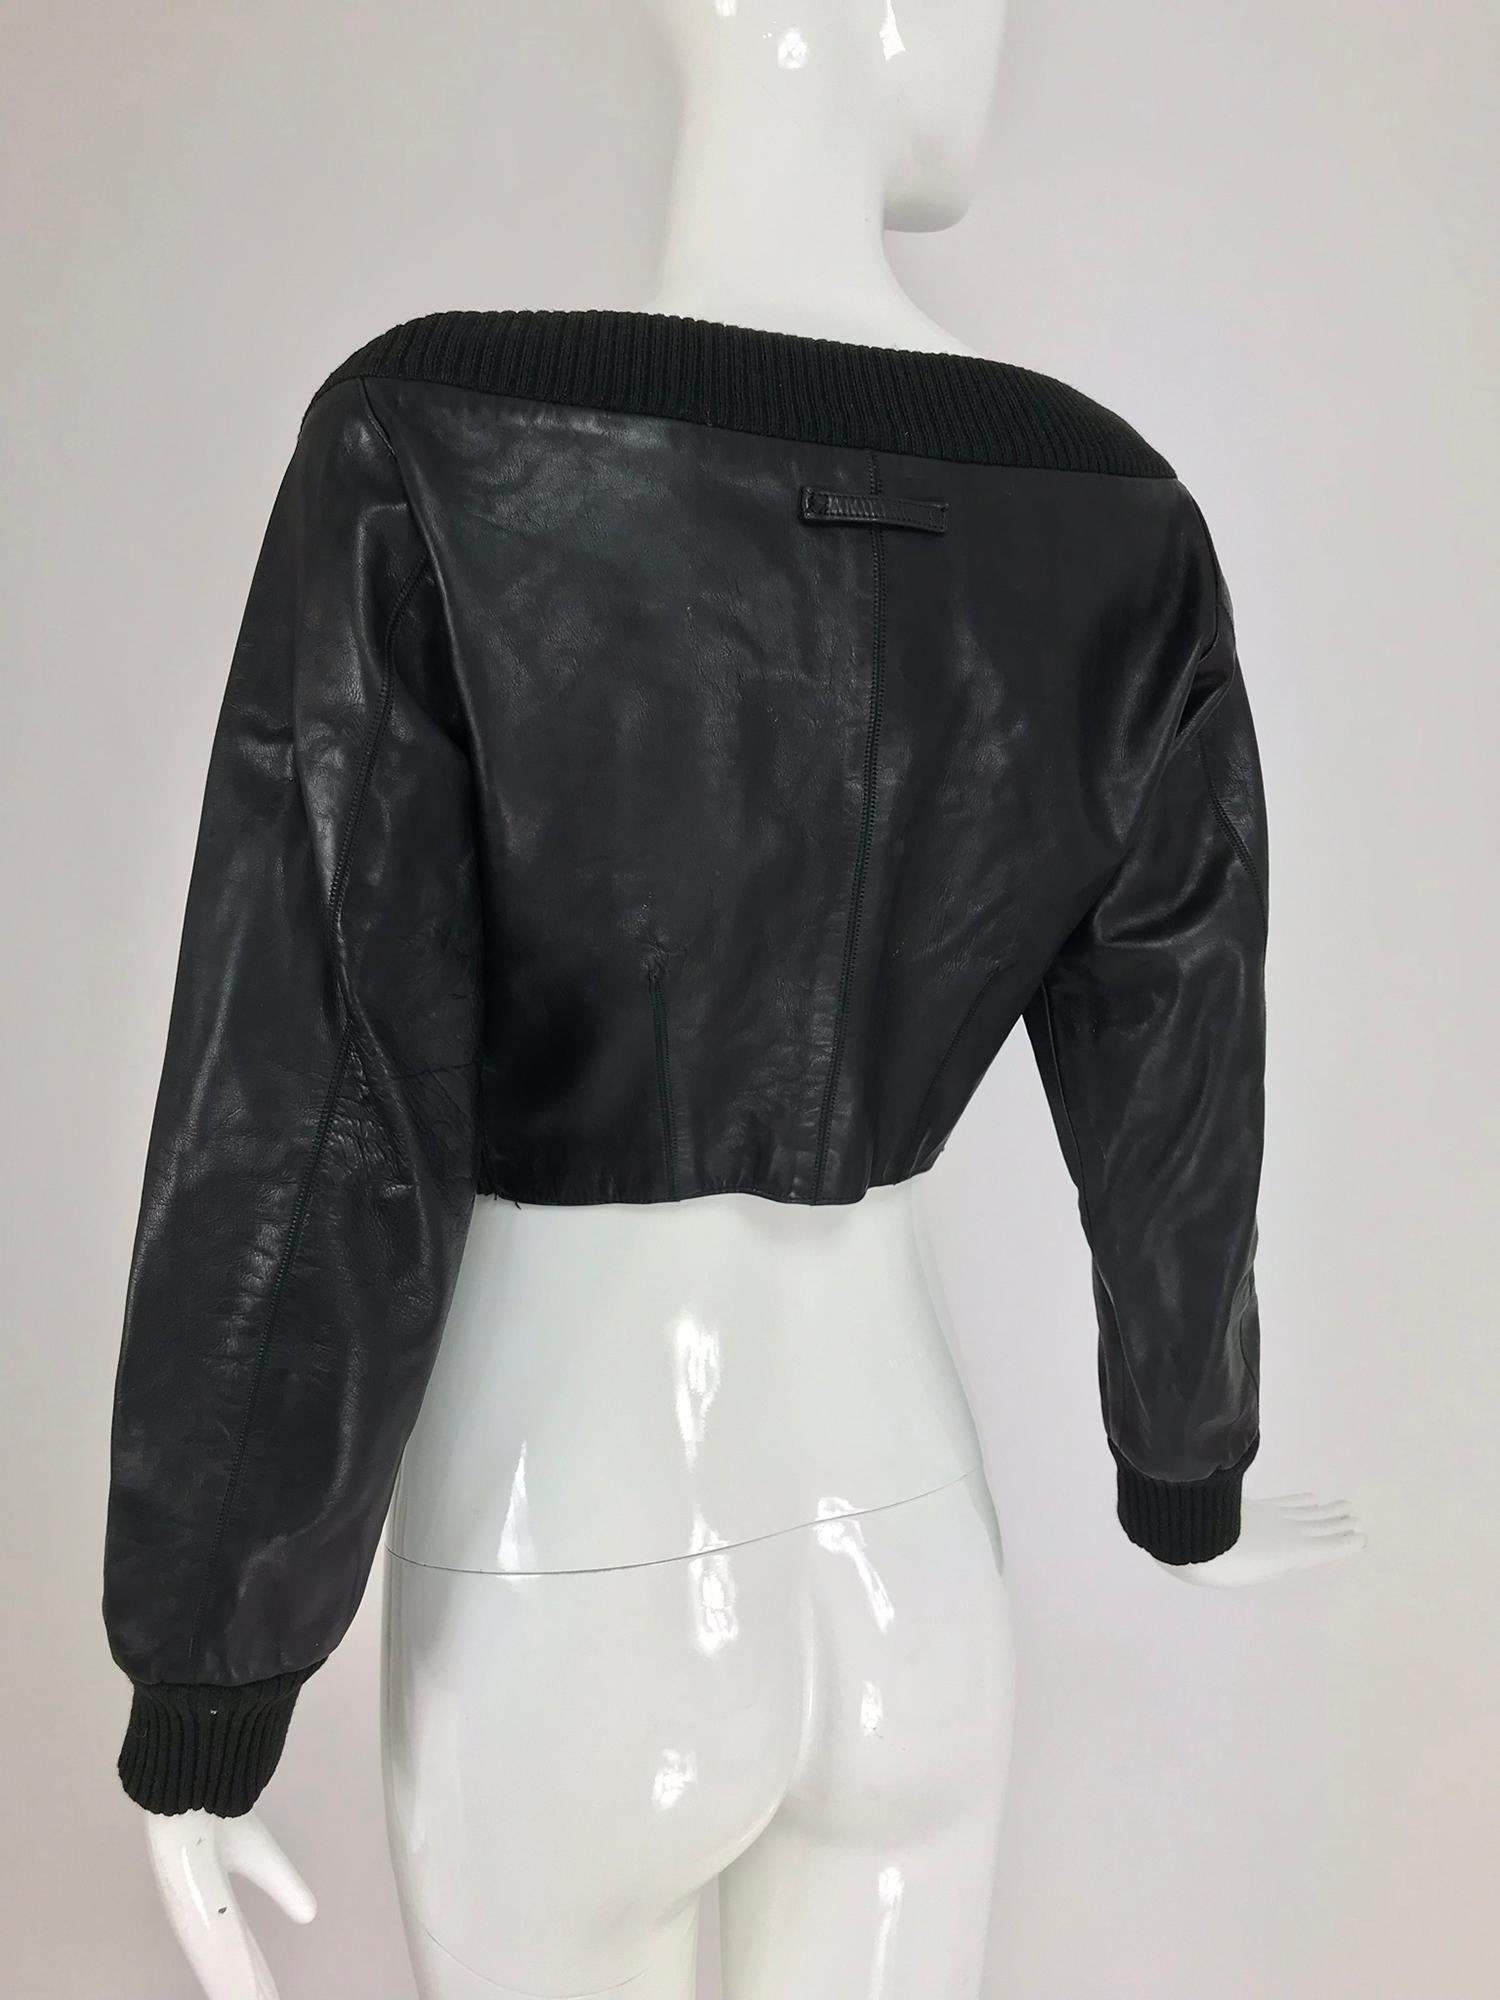 Jean Paul Gaultier black leather and Knit Off the Shoulder Jacket 1990s 2